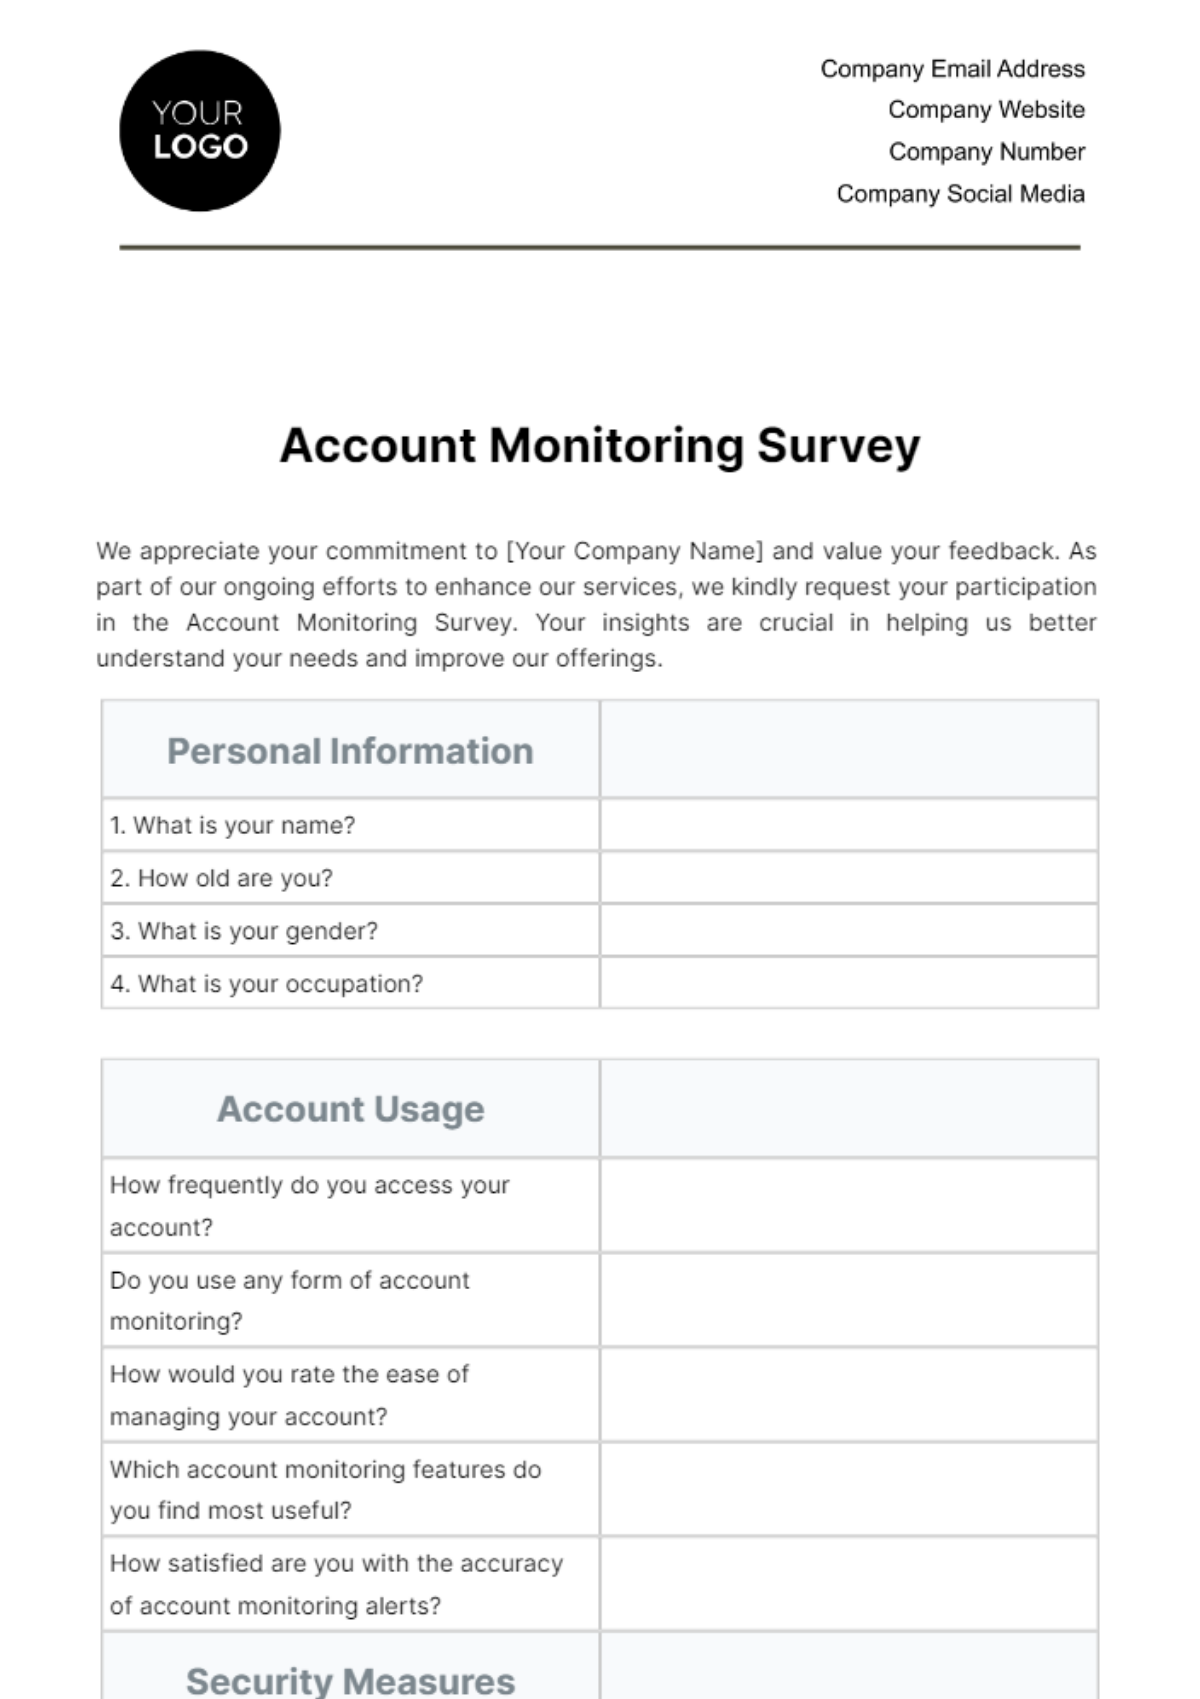 Account Monitoring Survey Template